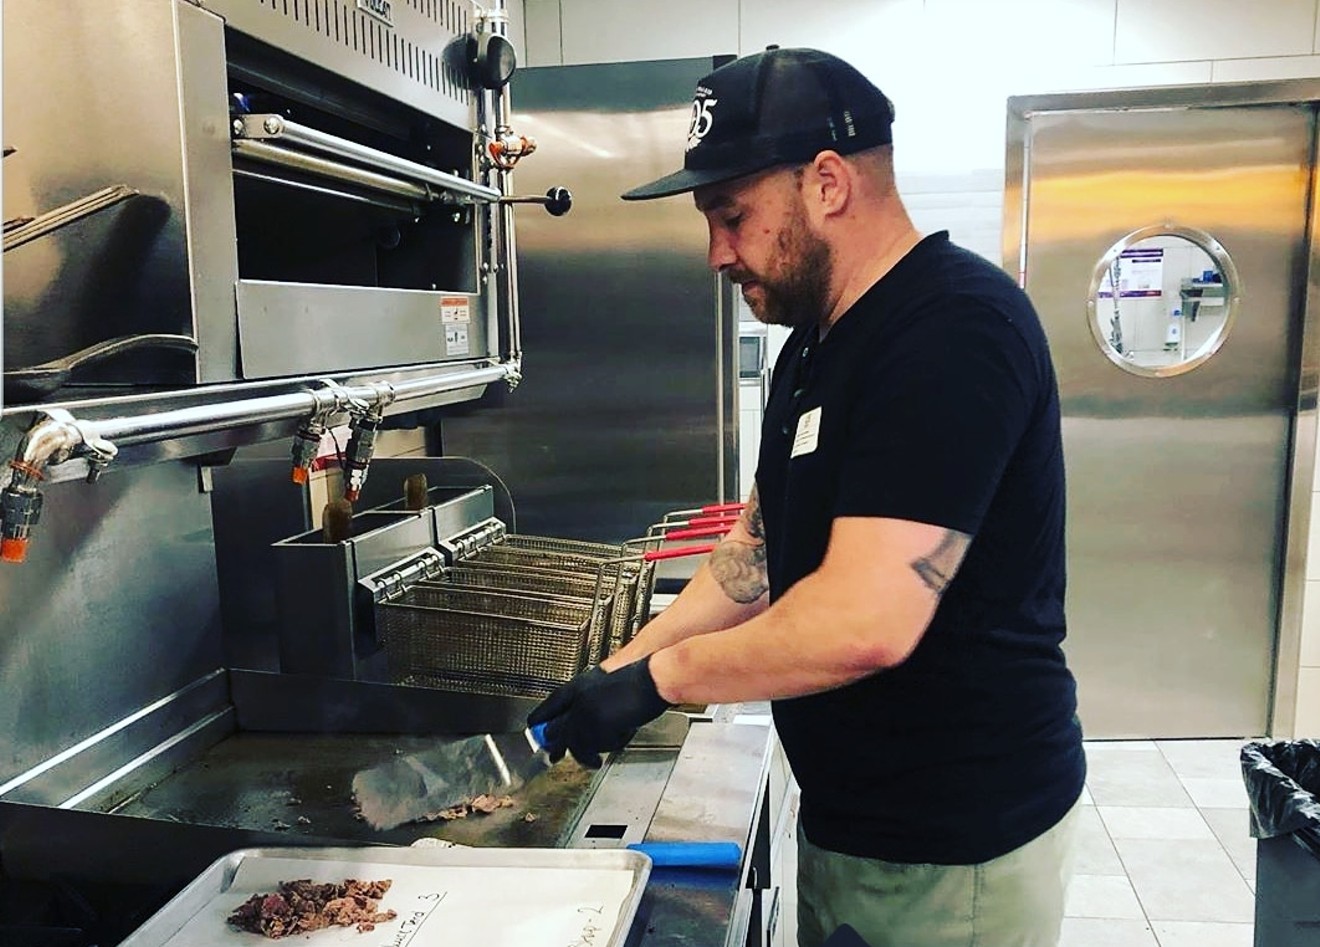 Philadelphia Sandwich Co. proprietor Aaron Link alleges that he was improperly evicted from the kitchen at Flying Basset Brewing and that the now-shuttered brewery is holding $100,000 worth of his kitchen equipment.